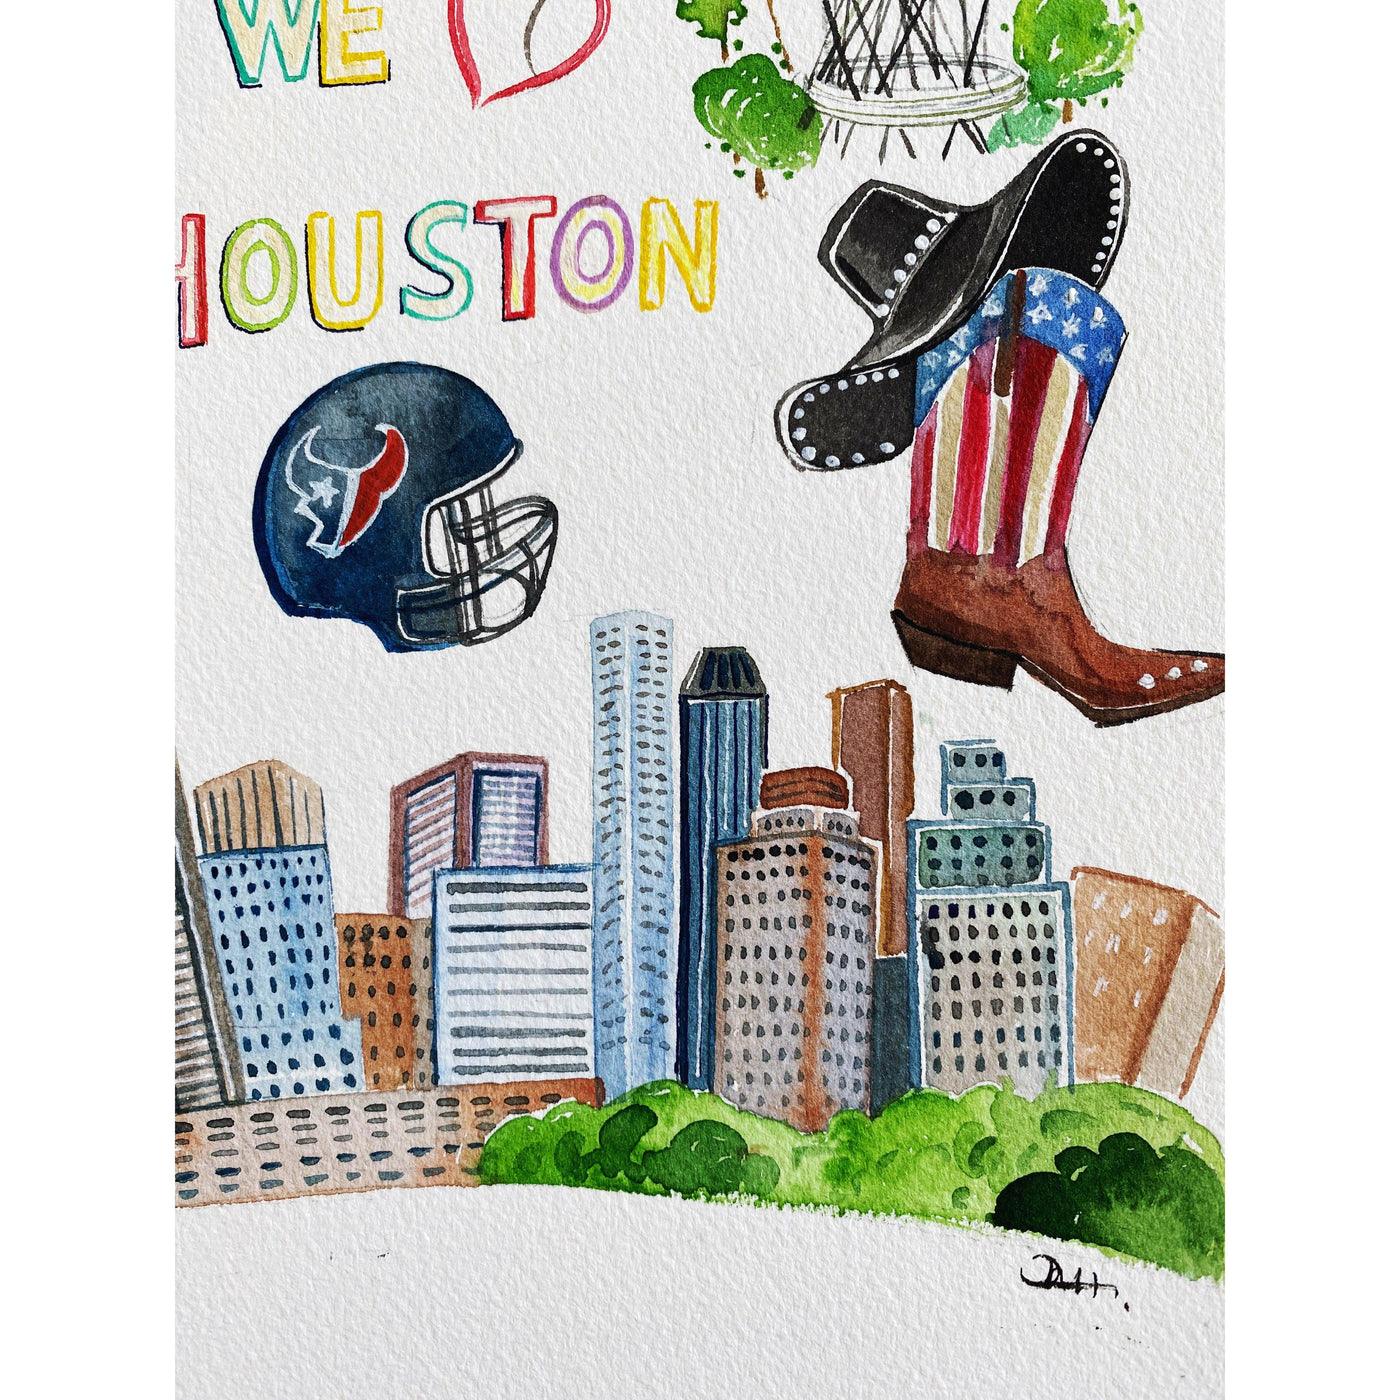 HOUSTON LOVE by Rongrong DeVoe- Details